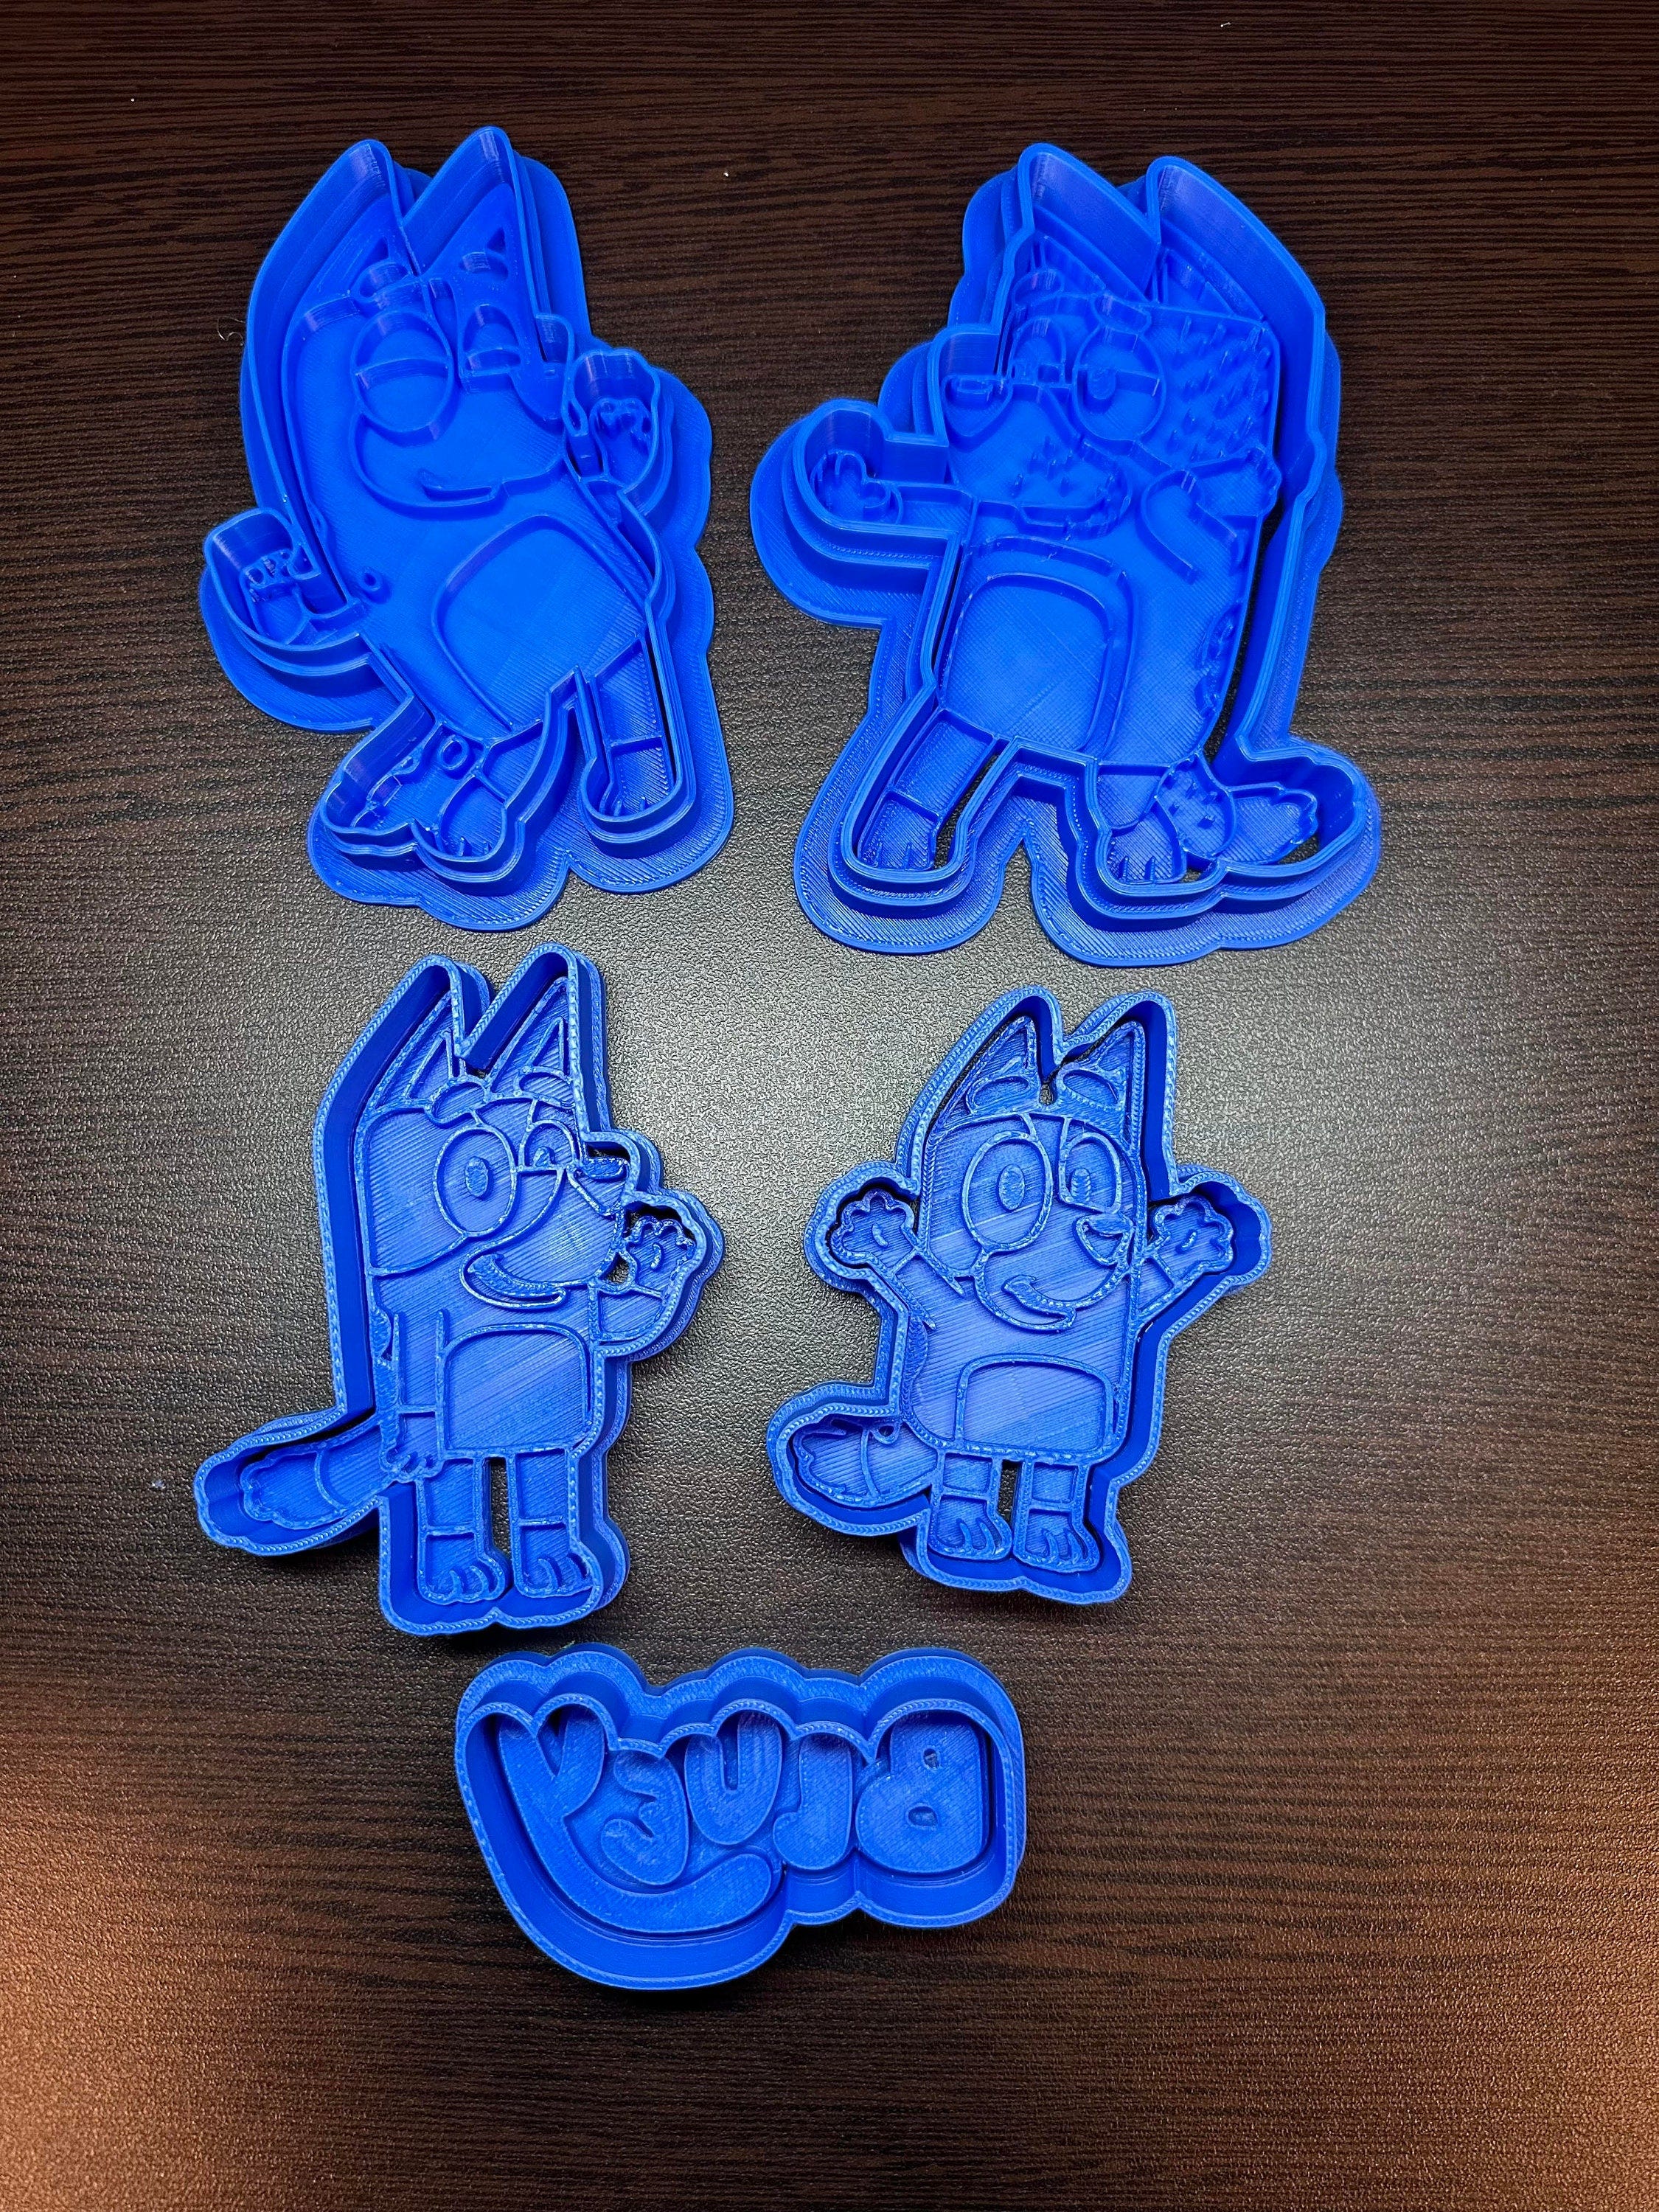 Bluey Family Cookie Cutters - Bluey Bingo Bandit Chilli and the Logo